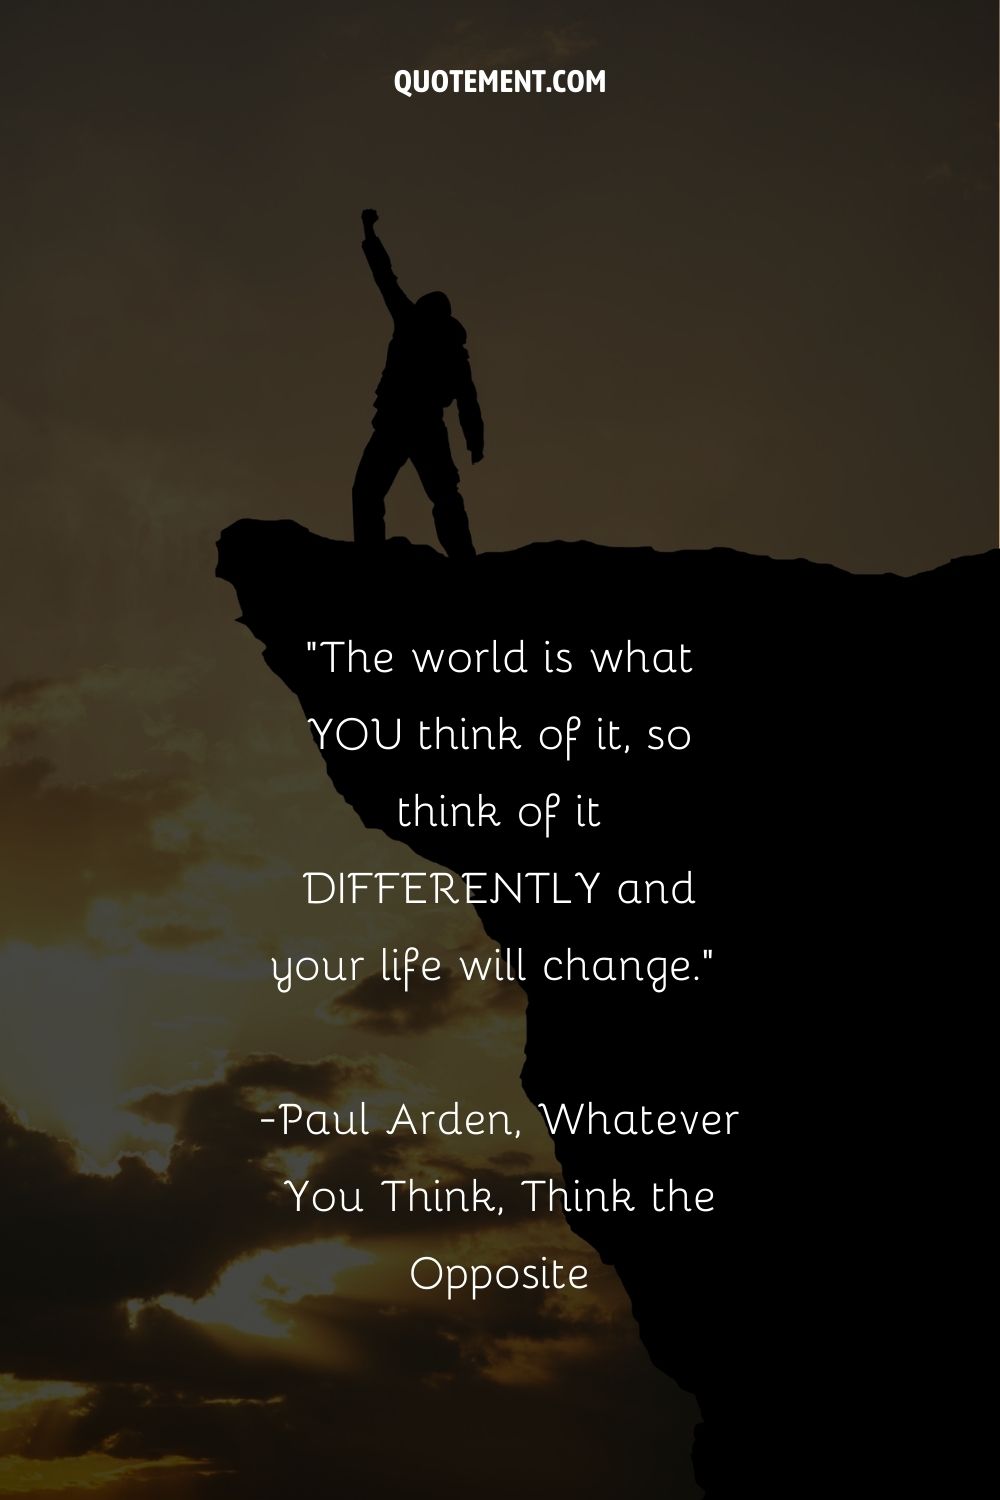 The world is what YOU think of it, so think of it DIFFERENTLY and your life will change